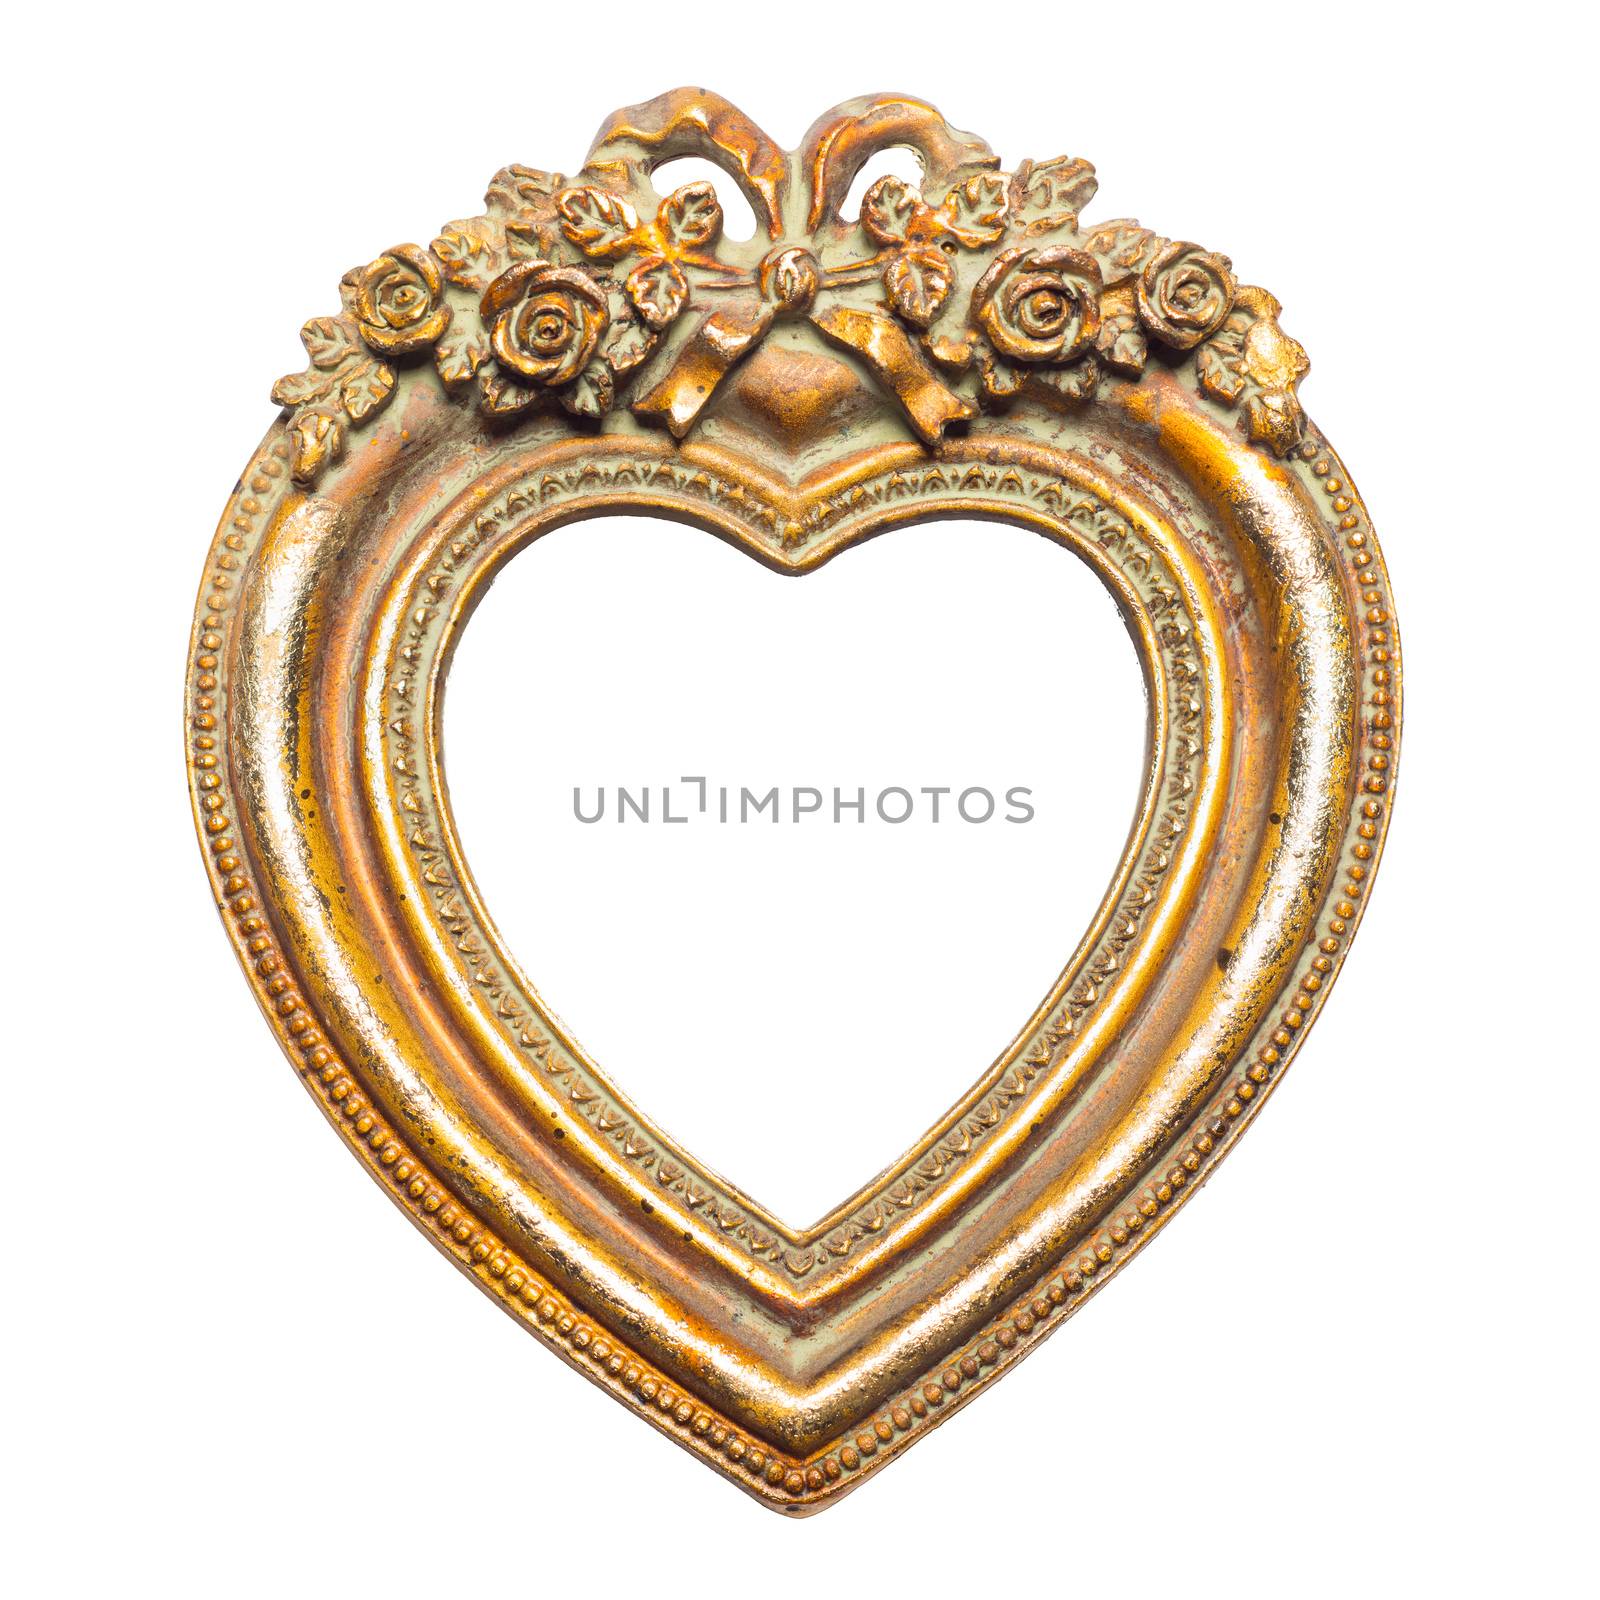 Old memories - gold heart shape picture frame